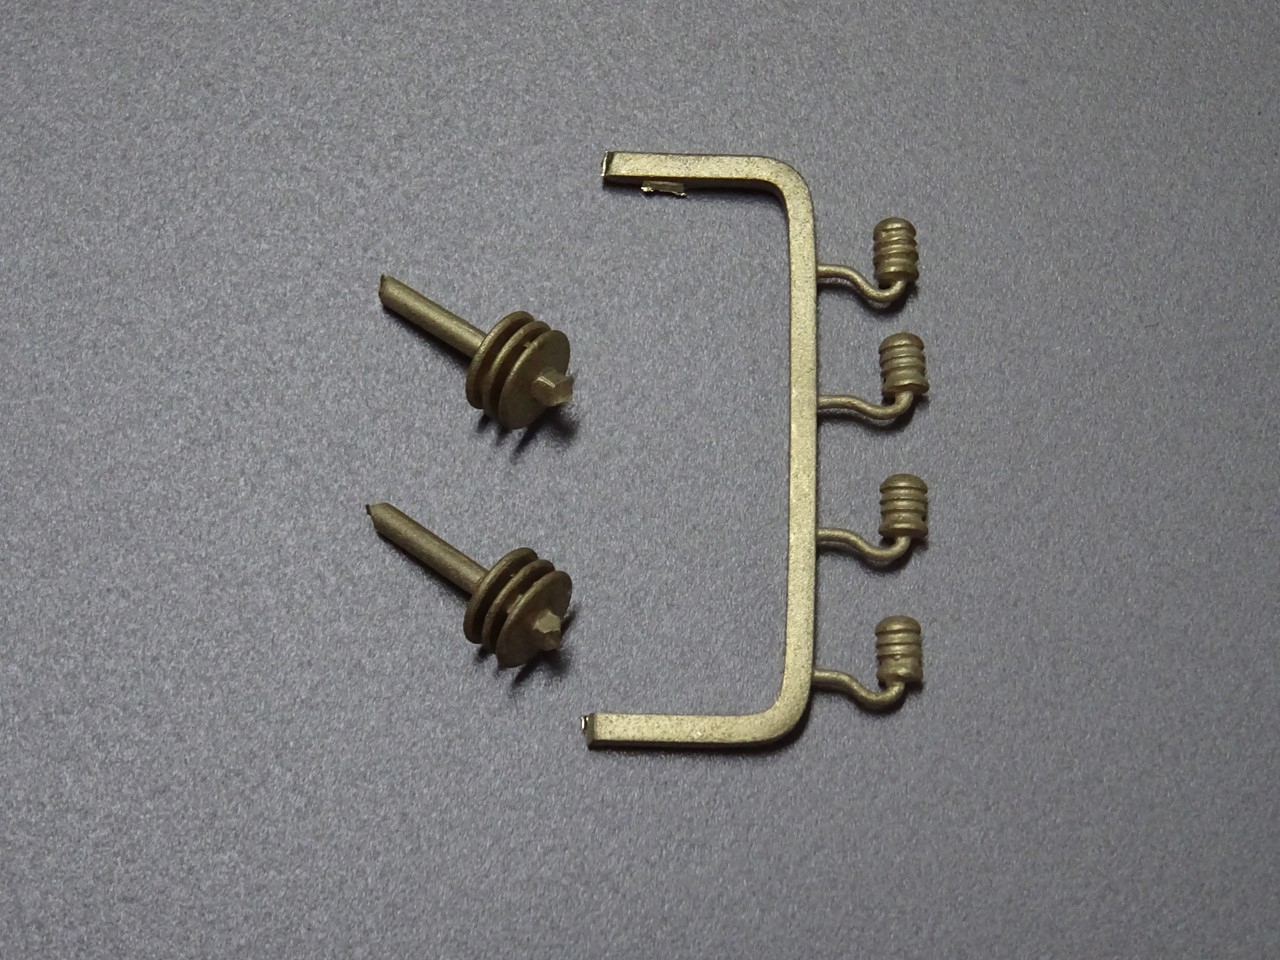 Picture of Post mount electrical insulators